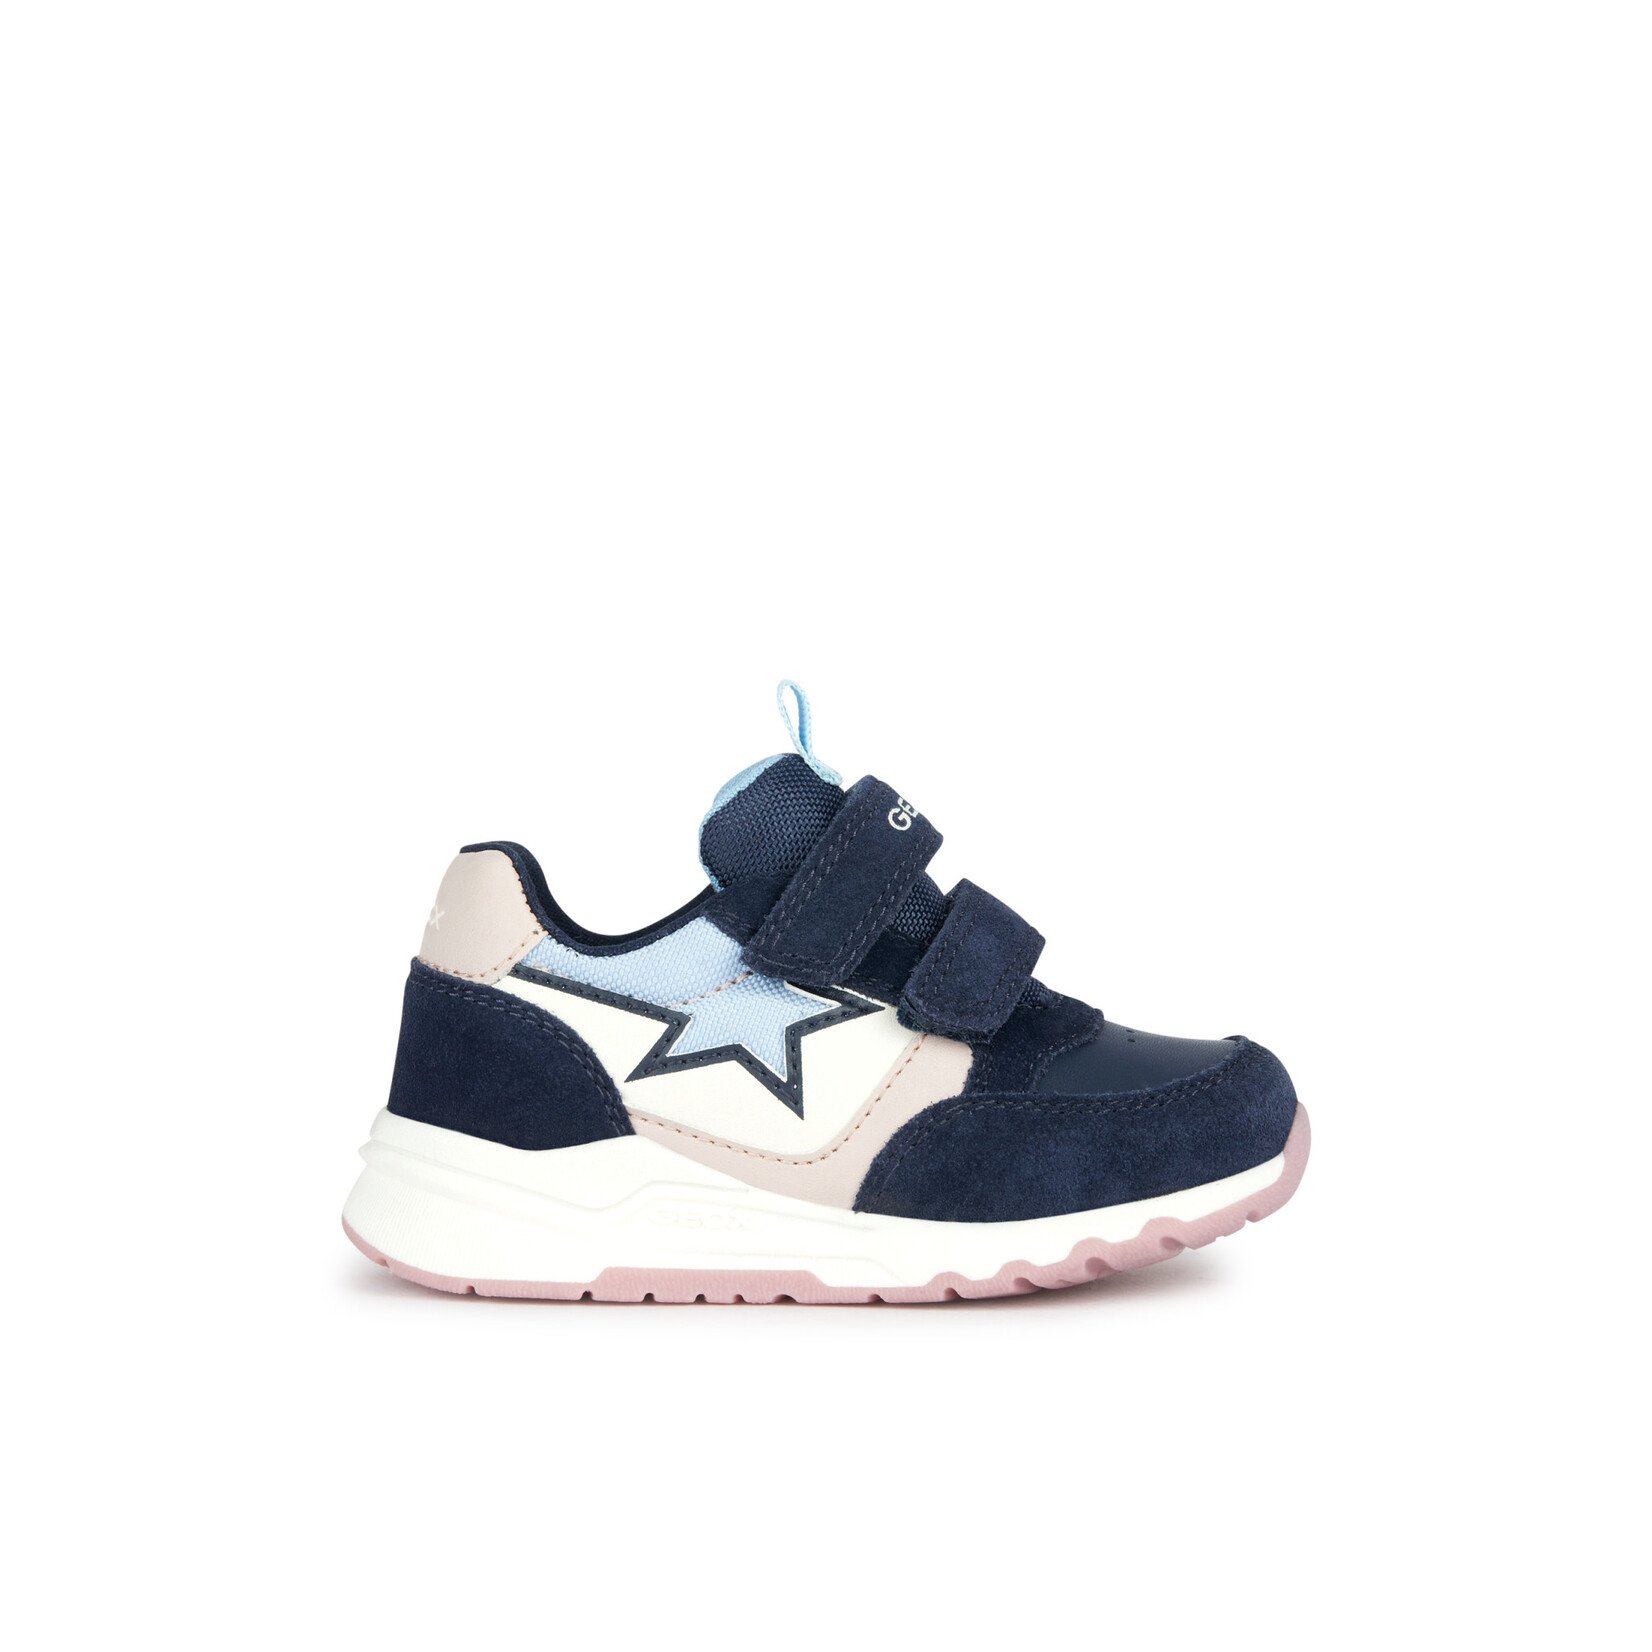 Geox GEOX - Sport Shoes 'B. PYRIP - Suede+Synt.Leather' - Dark Navy/Light Pink